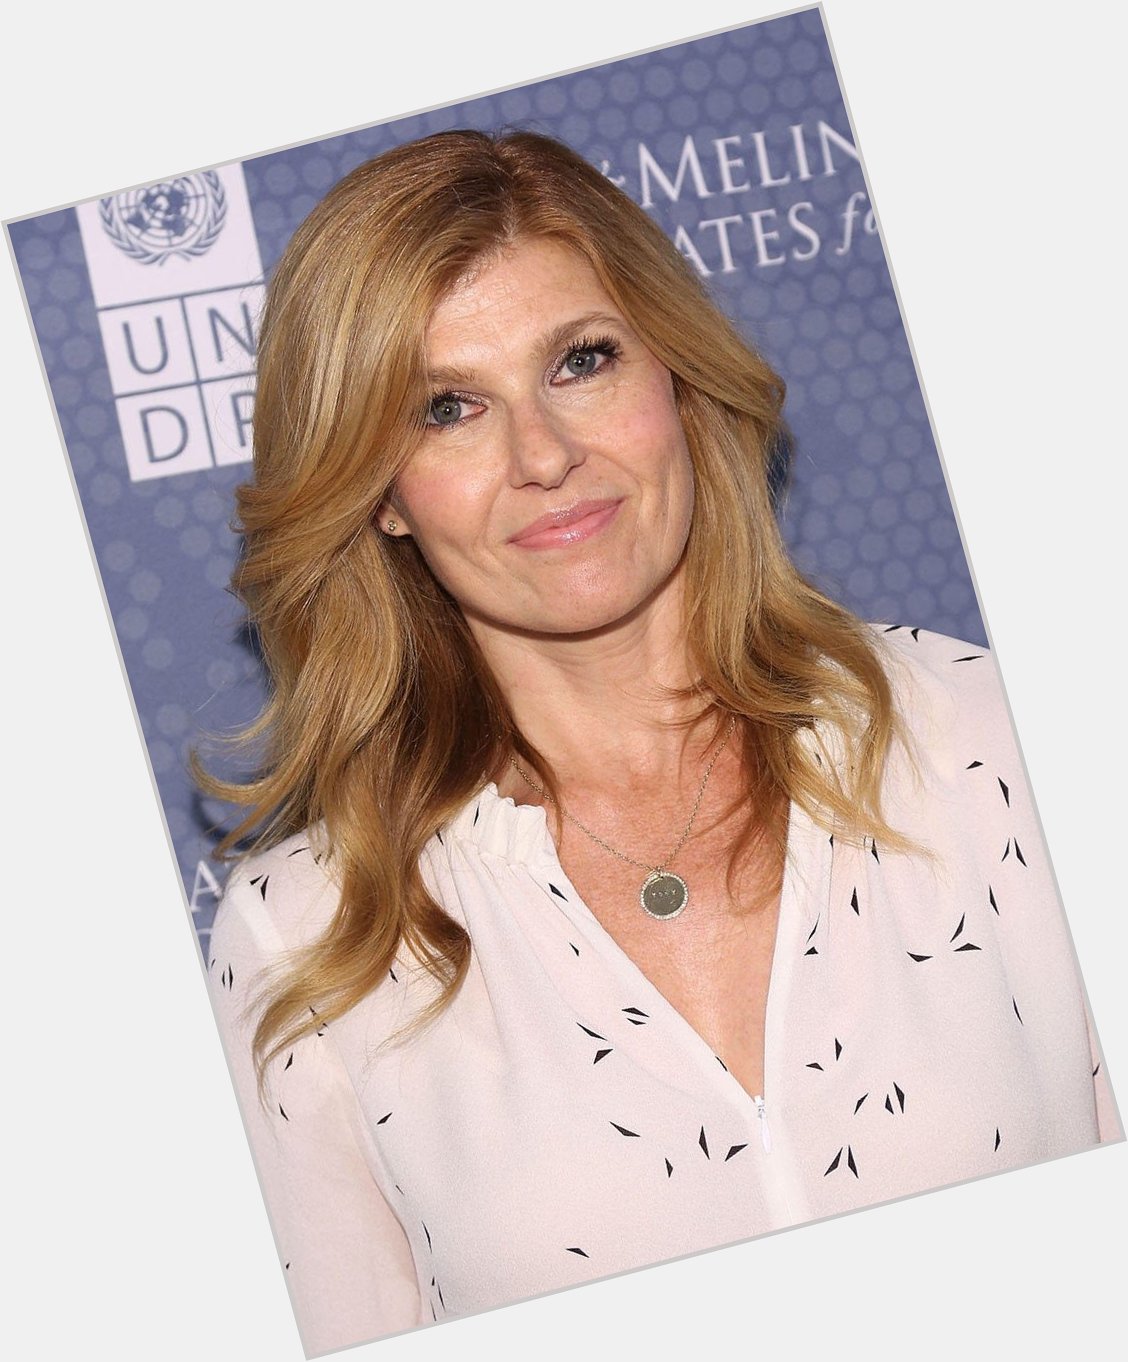 Happy birthday to the absolutely stunning Connie Britton!!! Such a big fan! 